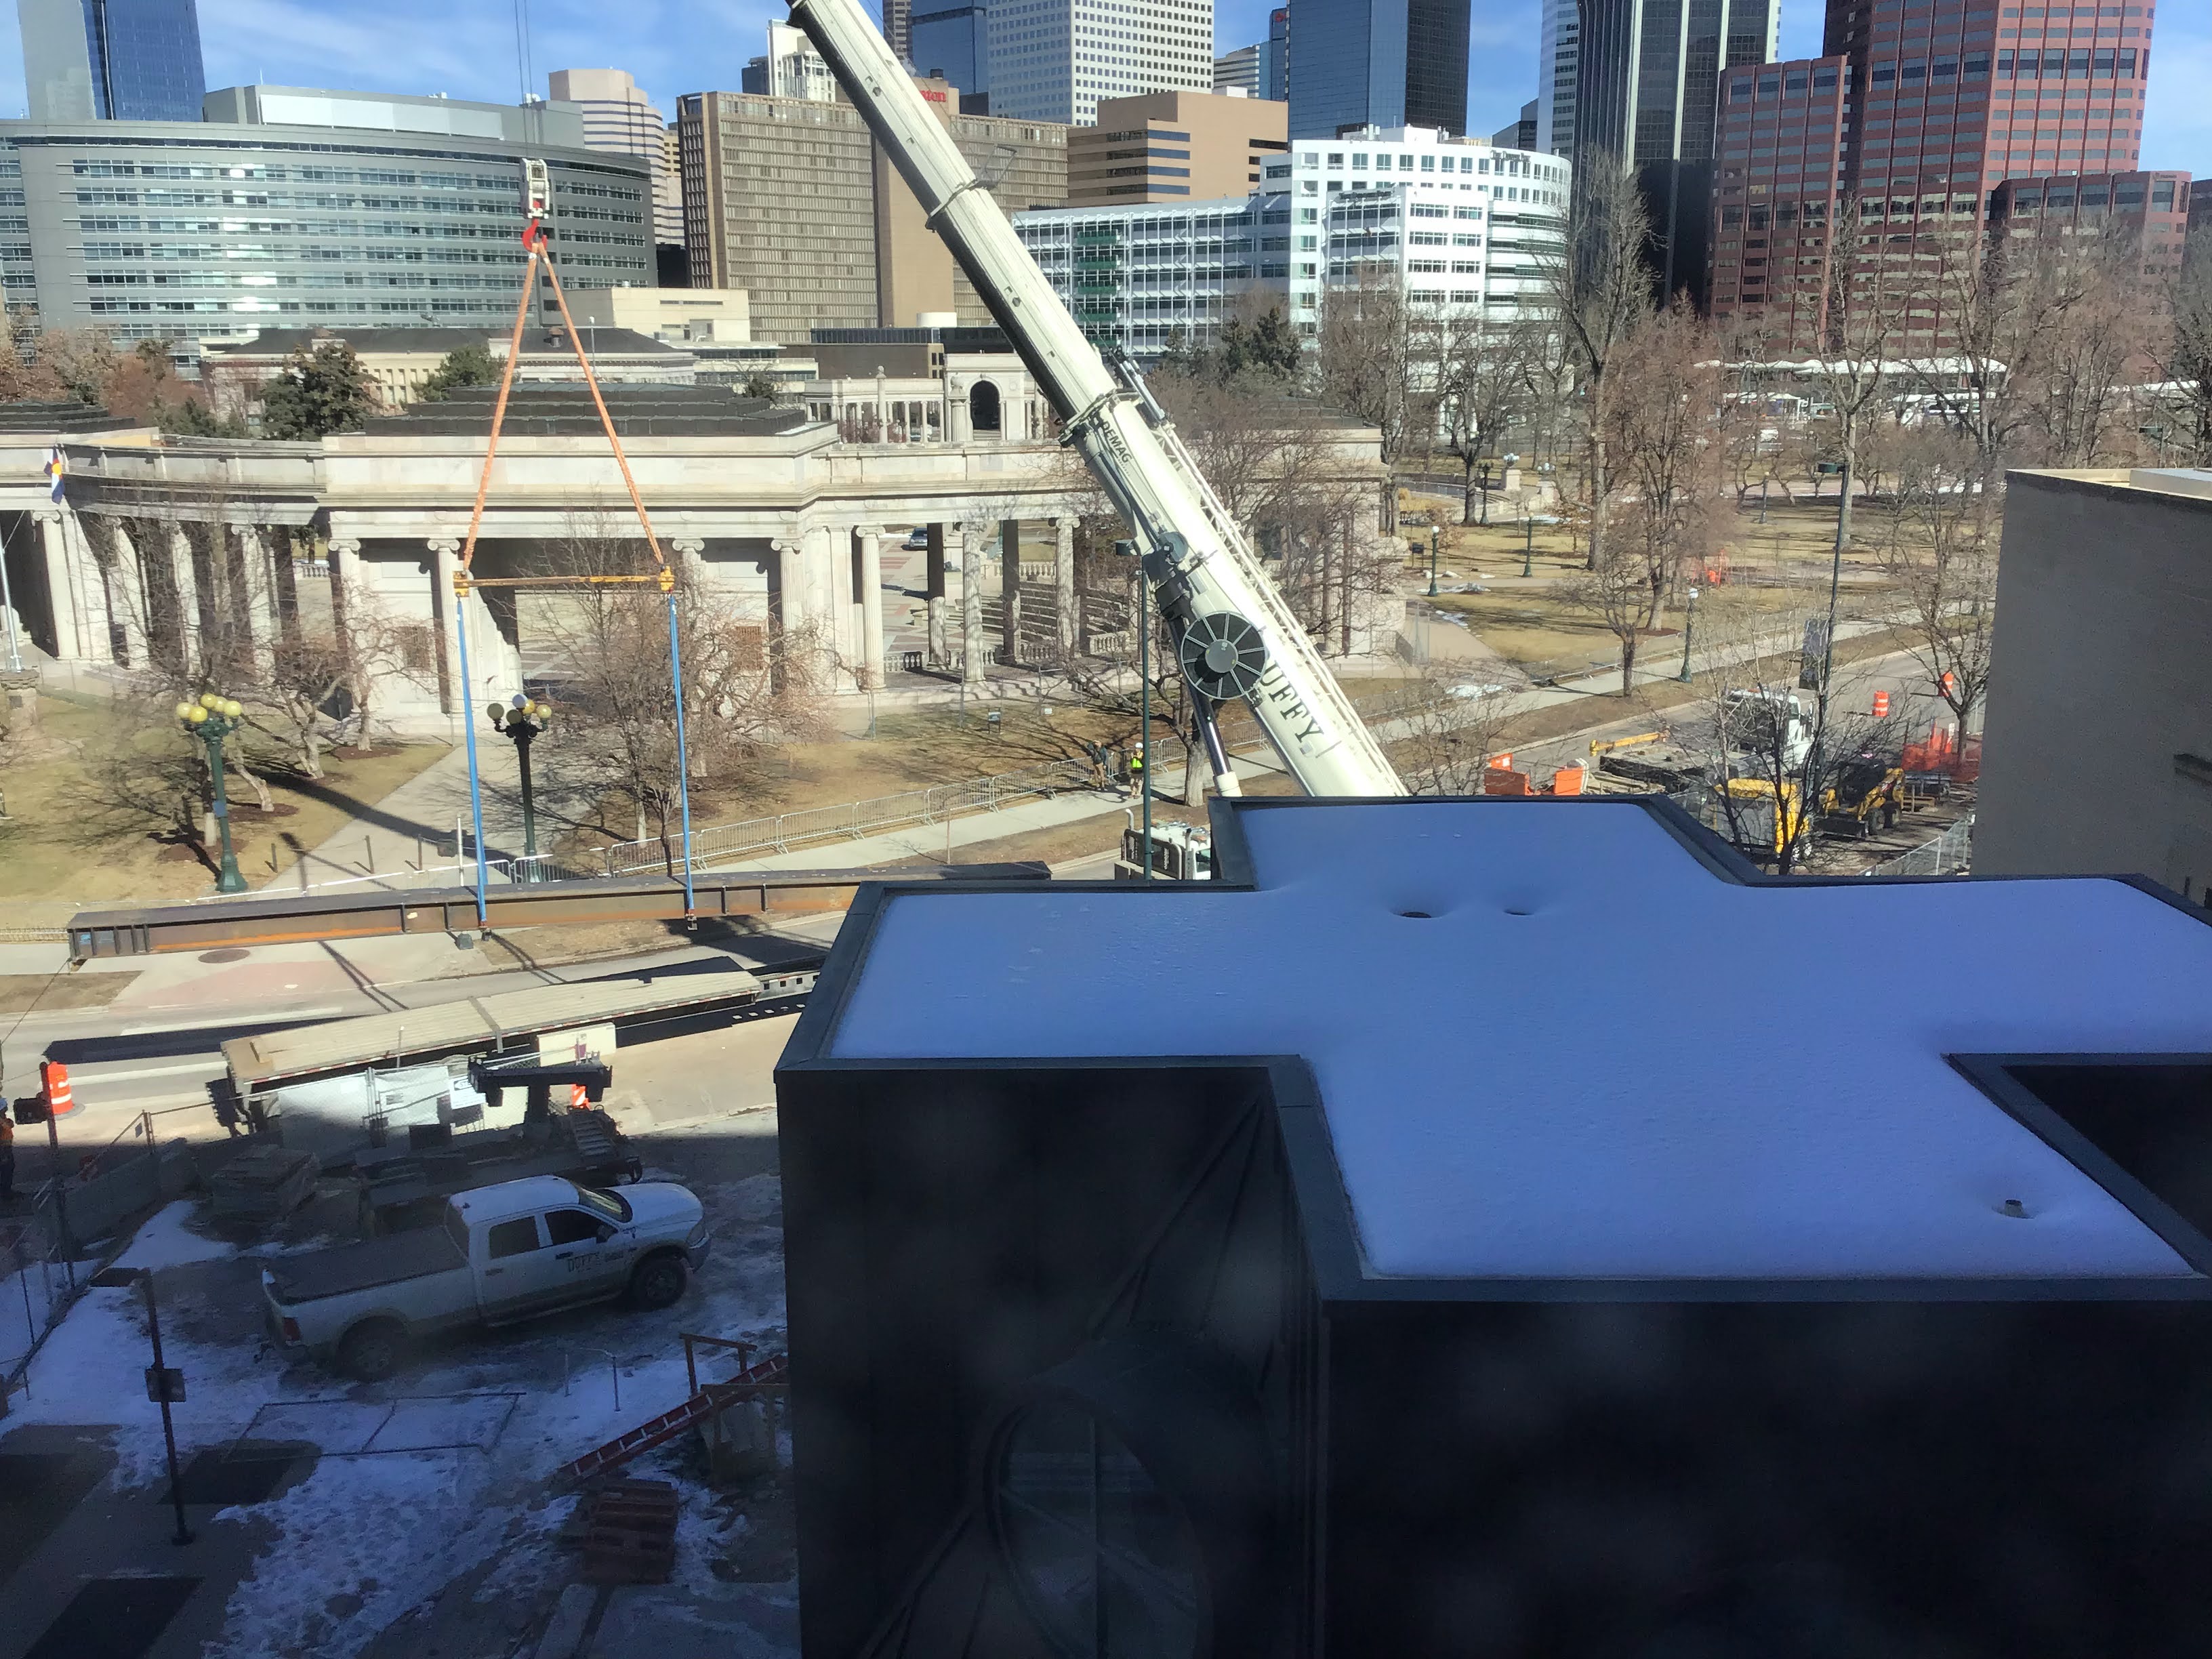 A crane is pictured lifting steel beams into the Central Library